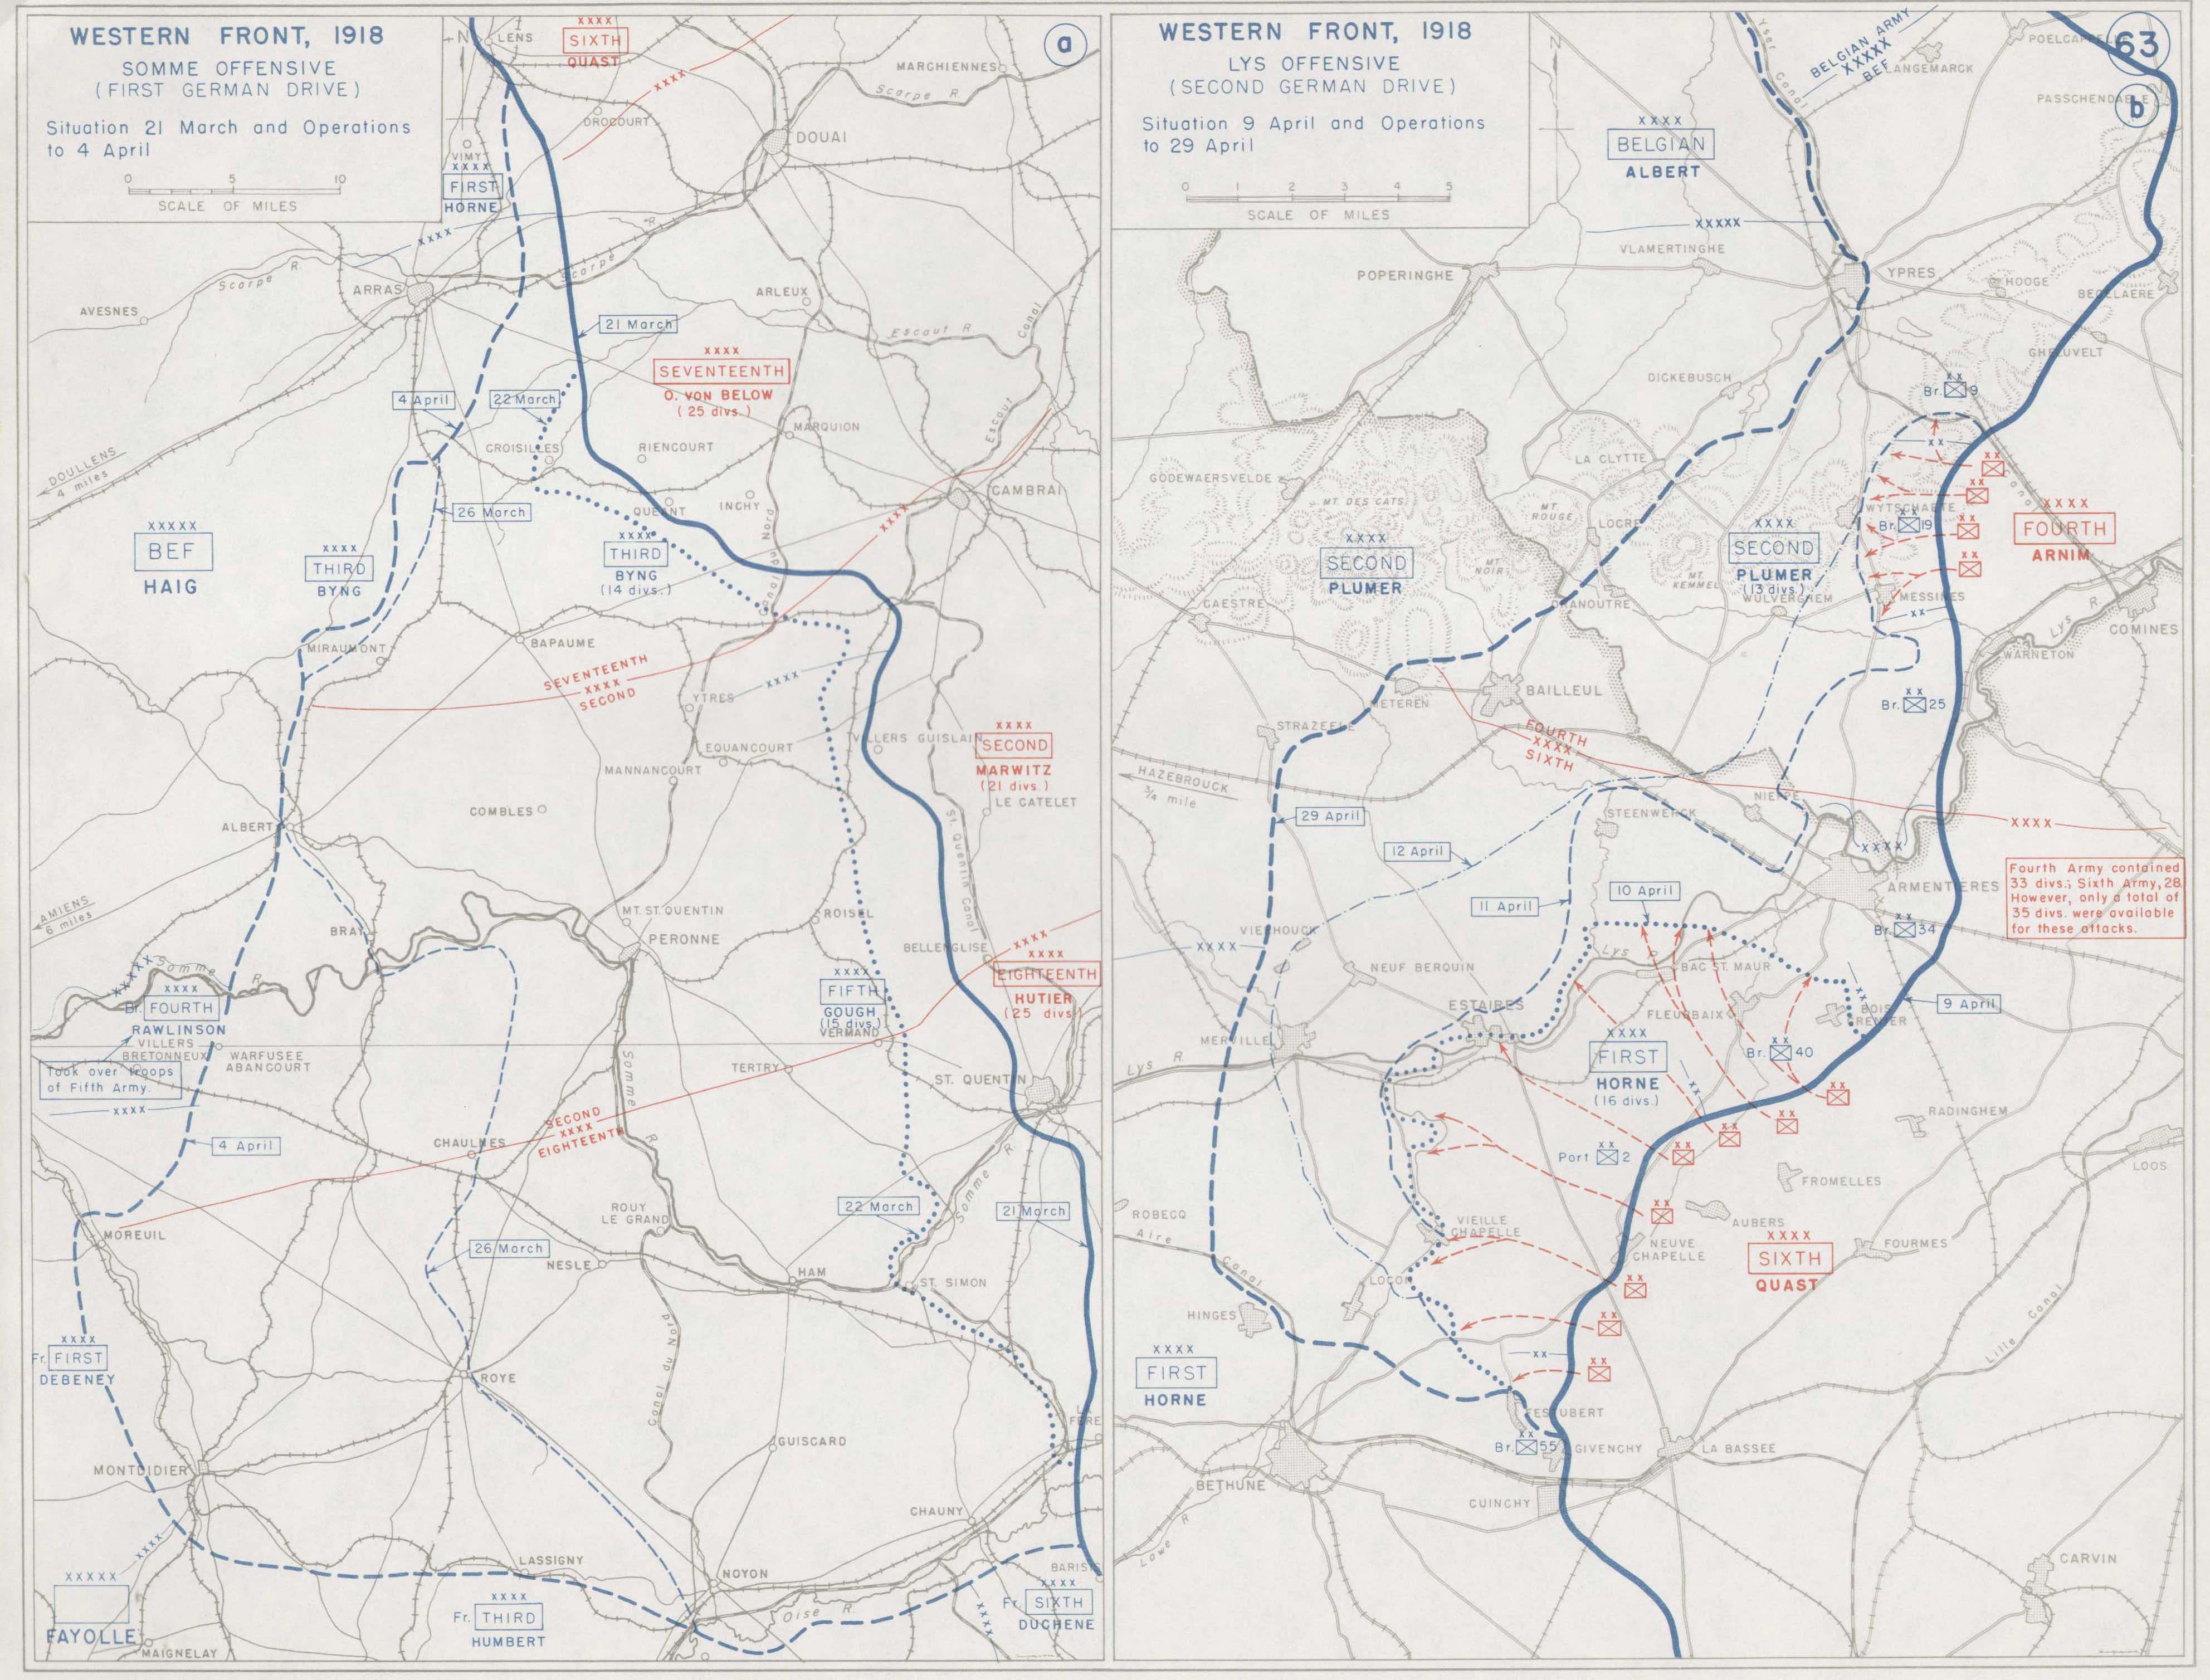 Map of Lys Offensive 9-29 April 1918